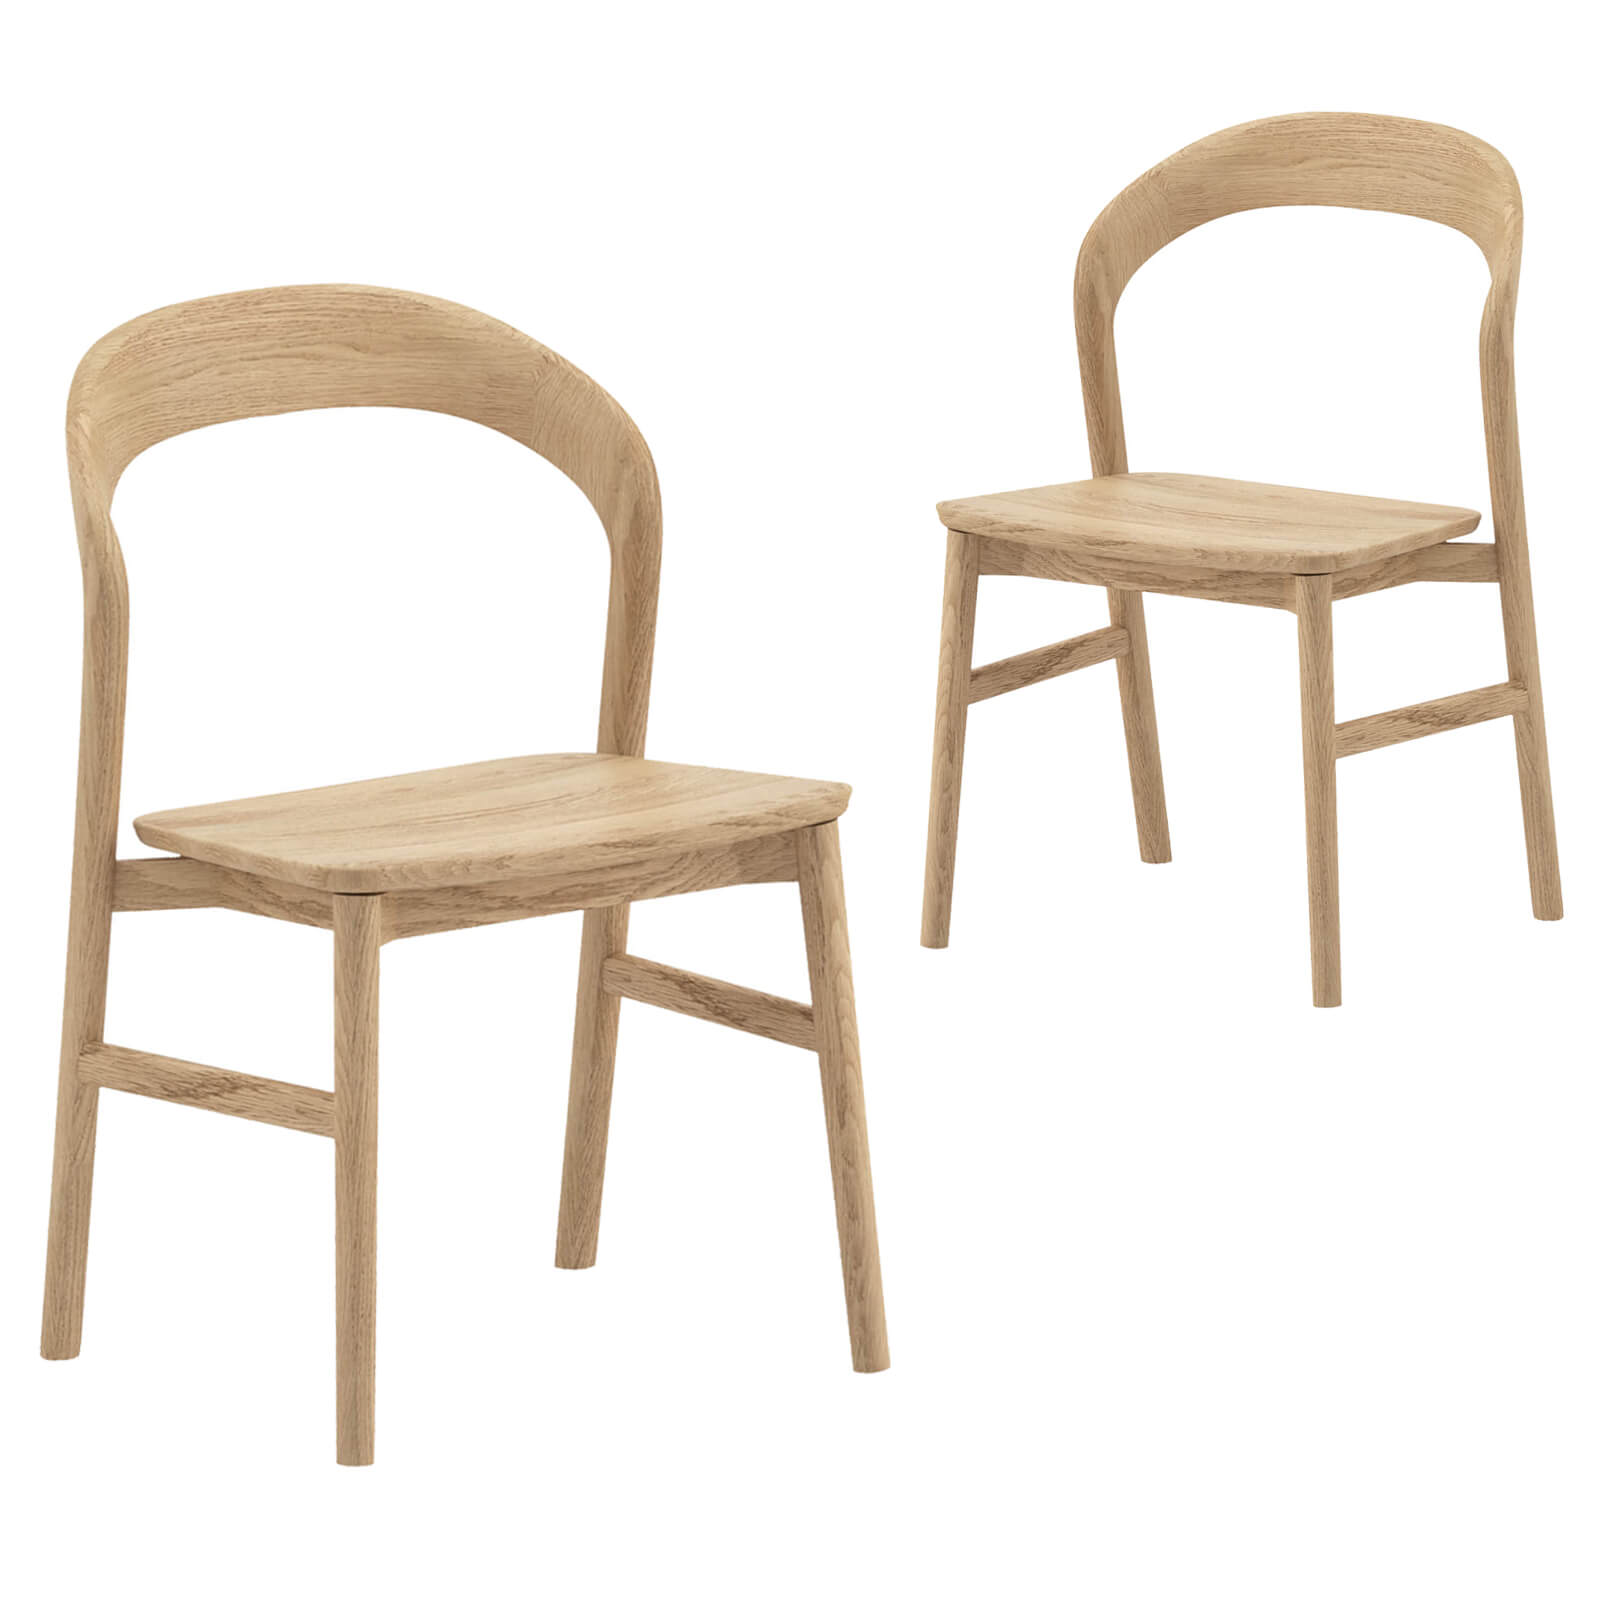 Alpine | Natural Scandinavian Style Upholstered Wooden Dining Chairs | Set Of 2 | Natural